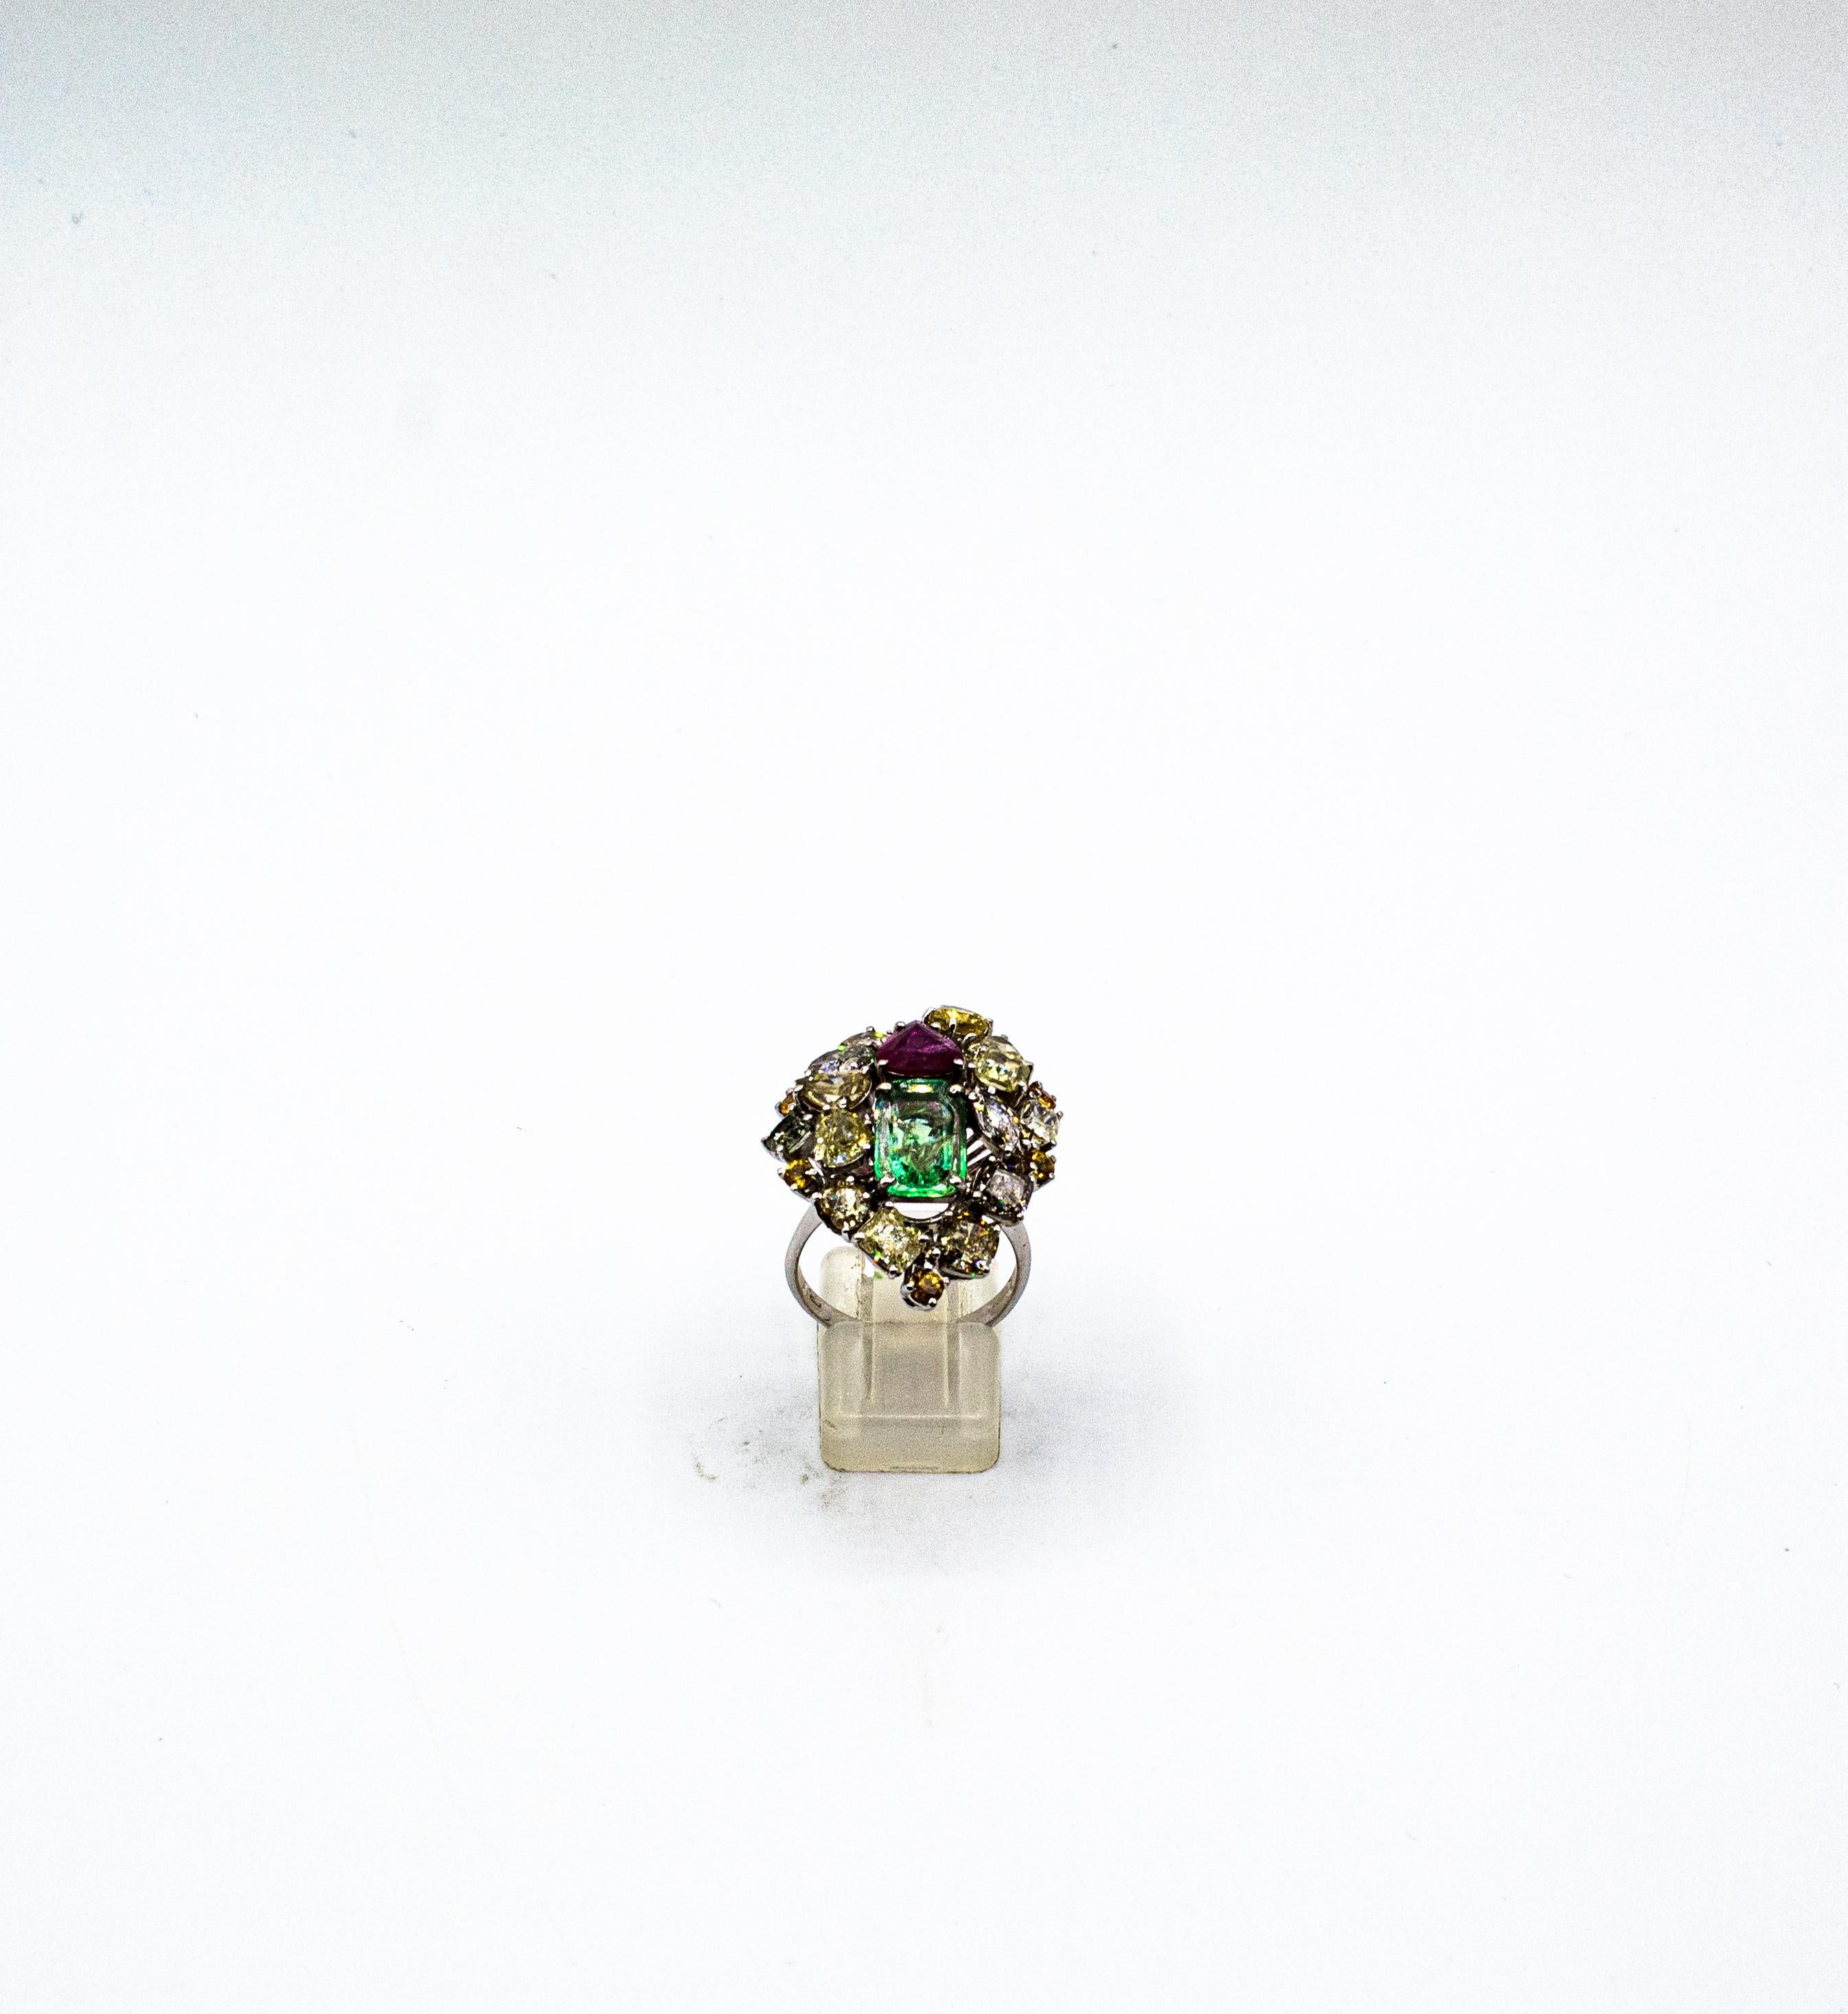 This Ring is made of 18K White Gold.
This Ring has 6.20 Carats of White, Brown and Yellow Old European Cut, Cushion Cut, Marquise Cut, Heart Cut, Pear Cut and Modern Round Cut Diamonds.
This Ring has a 2.20 Carats Natural Brazil Emerald Cut